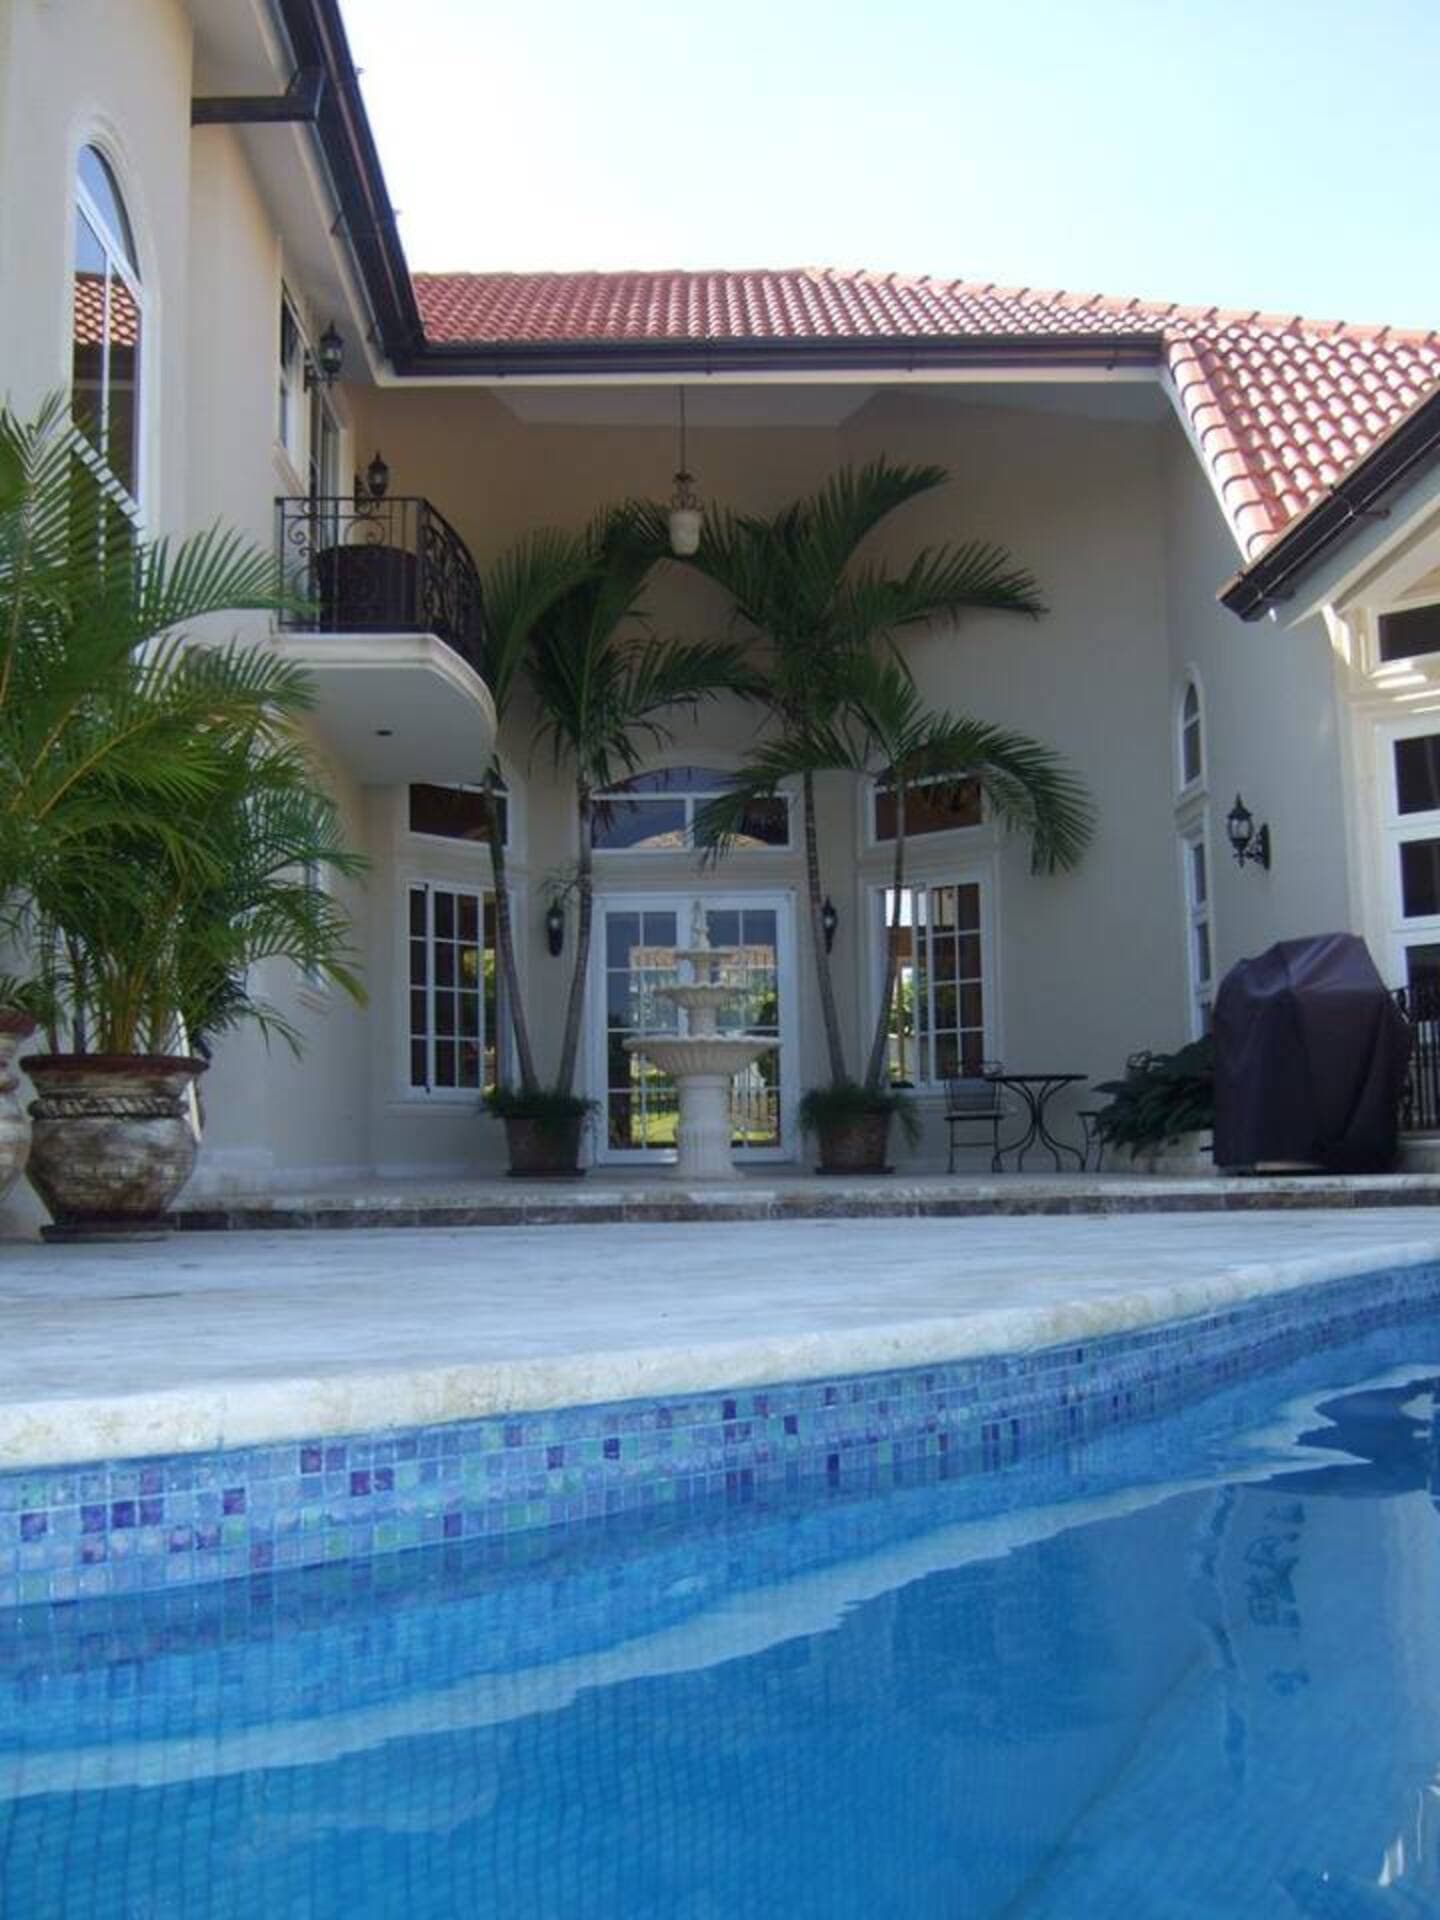 Bachelor Party Rentals in Cabarette, Dominican Republic